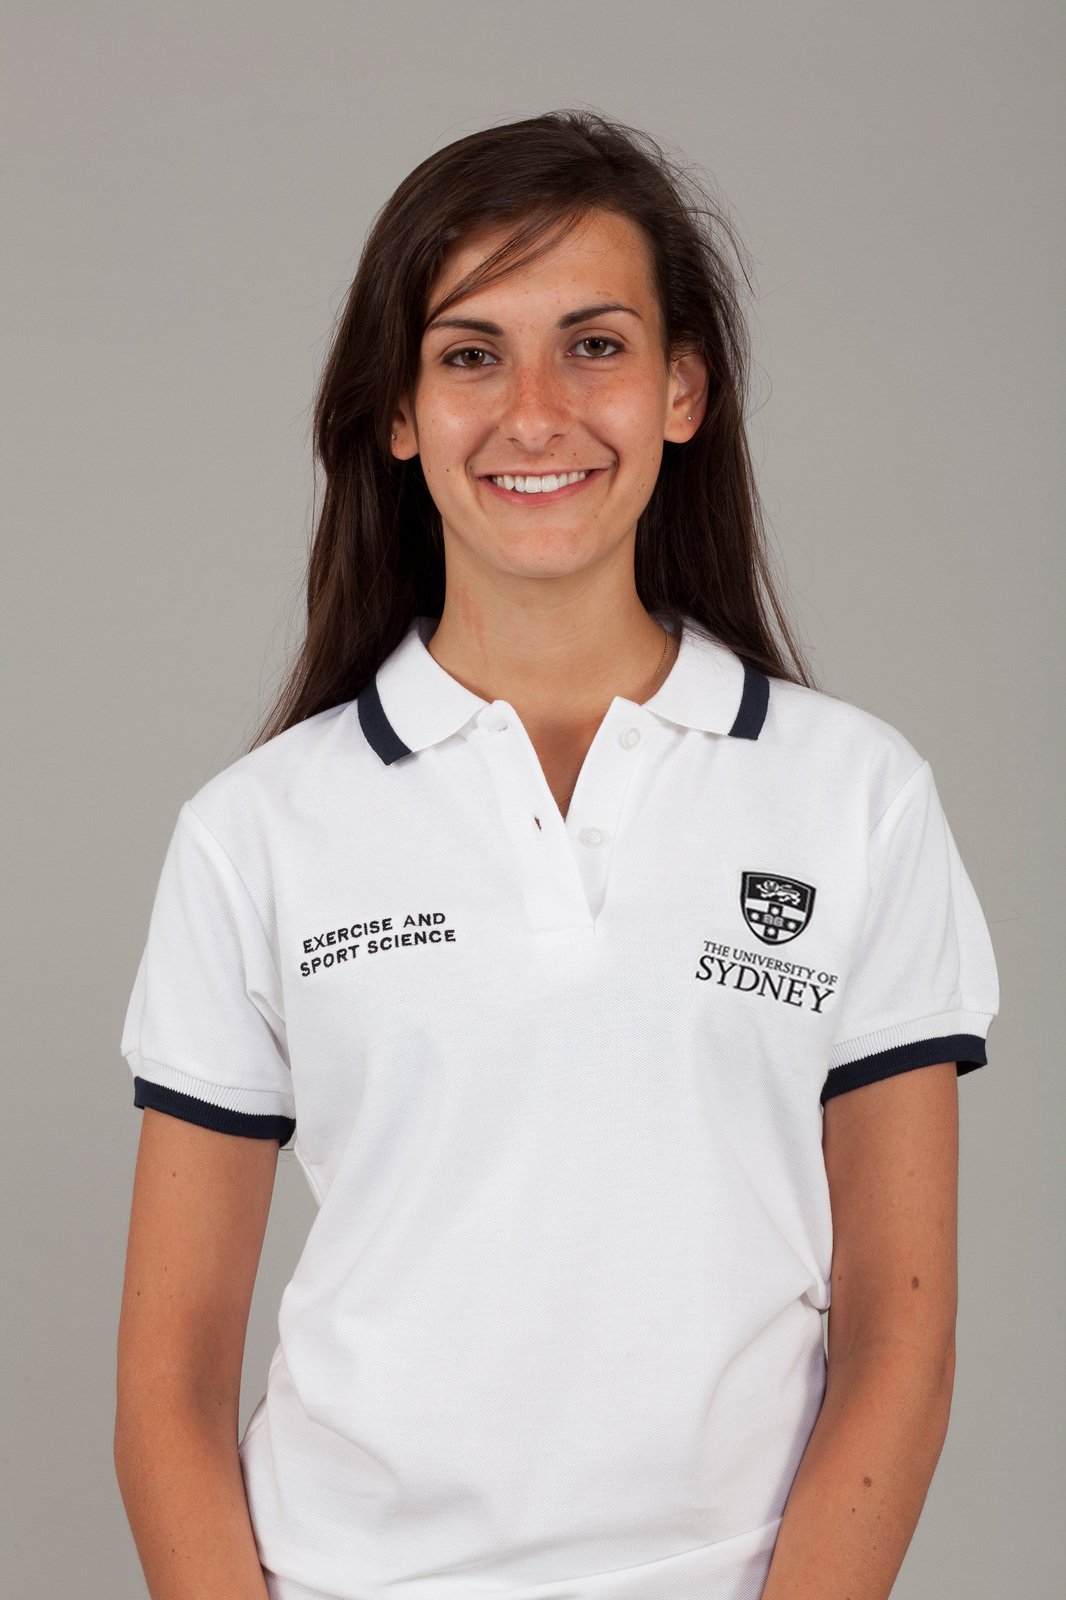 The University of Sydney eStore - Polo shirt - Women's Exercise and Sports  Science